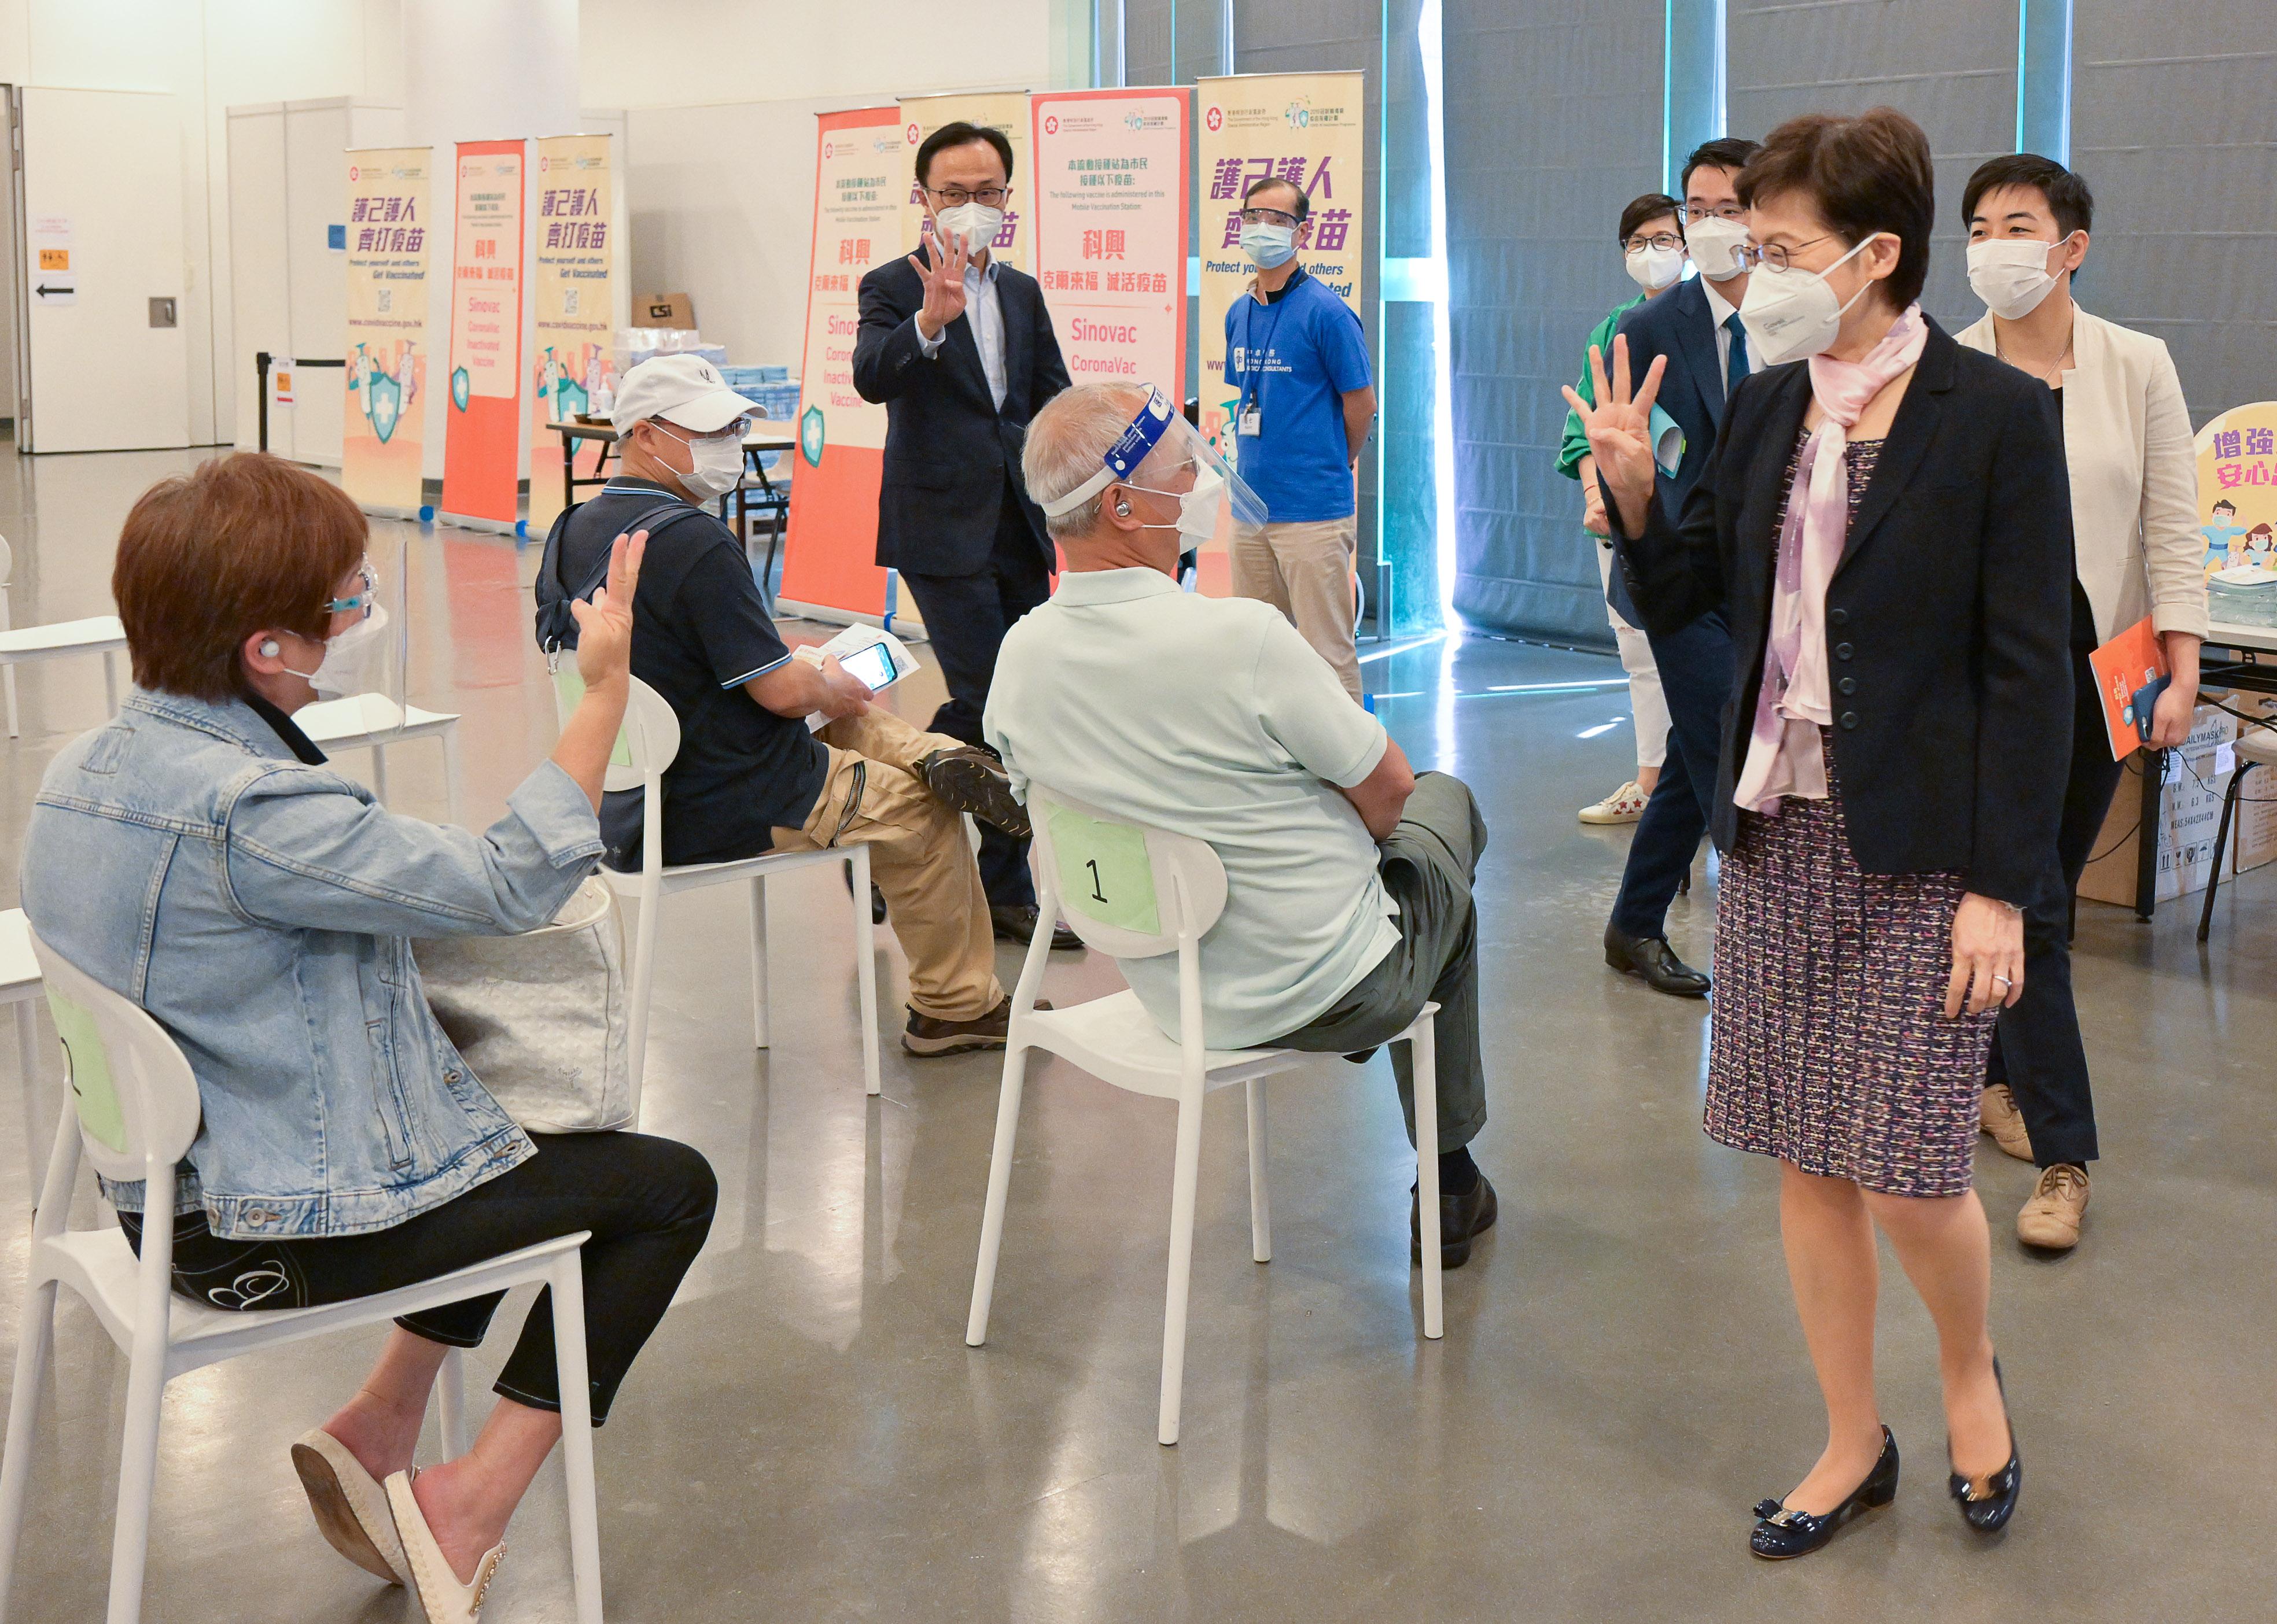 The Chief Executive, Mrs Carrie Lam, today (April 14) received her fourth dose of the Sinovac vaccine at the Community Vaccination Centre in the Hong Kong Central Library. Photo shows Mrs Lam (second right), accompanied by the Secretary for the Civil Service, Mr Patrick Nip (third left), chatting with members of the public who received their vaccination at the centre.